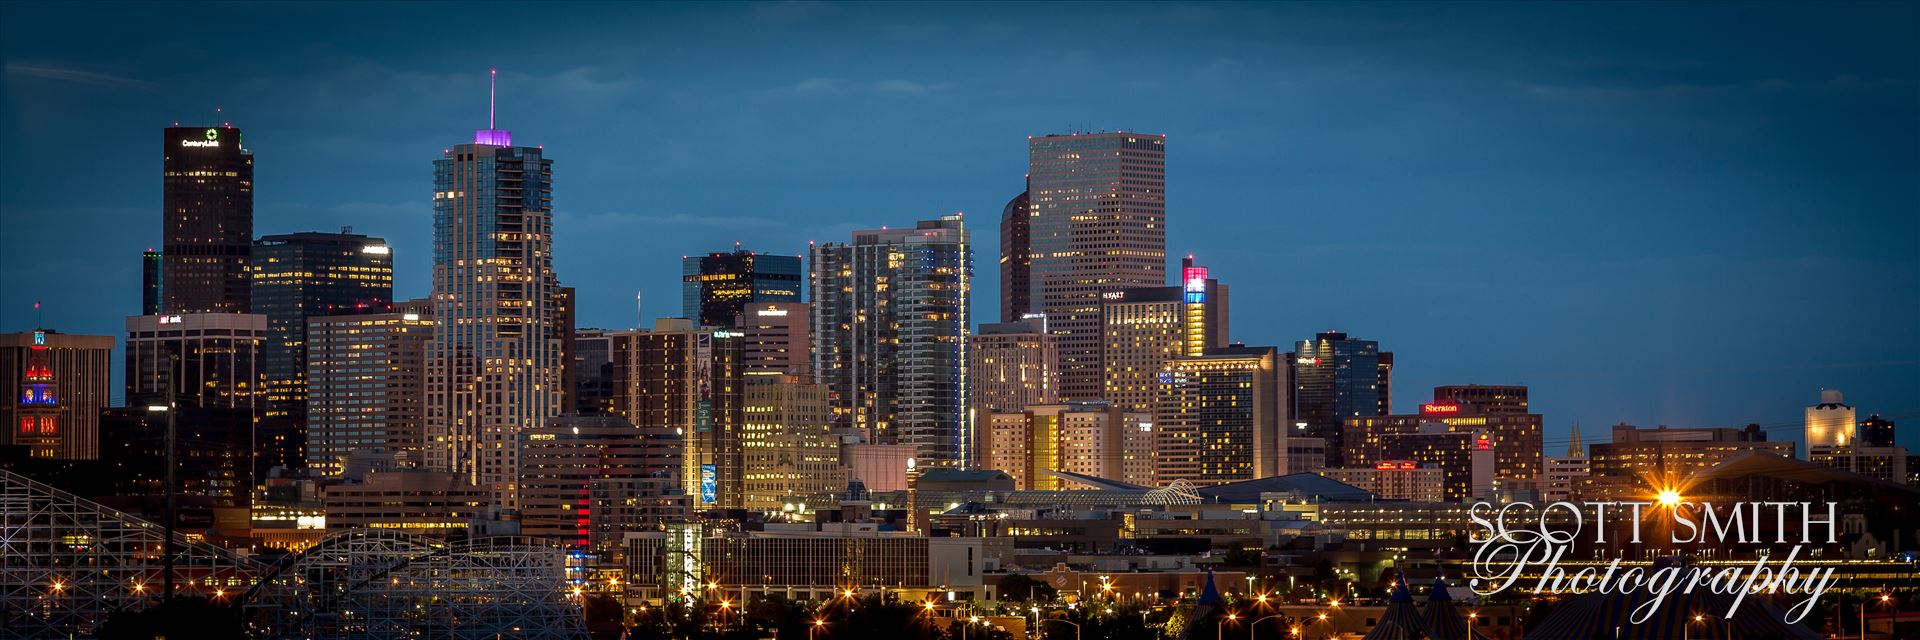 Denver at Night The Denver skyline as seen from Mile High Stadium. by Scott Smith Photos